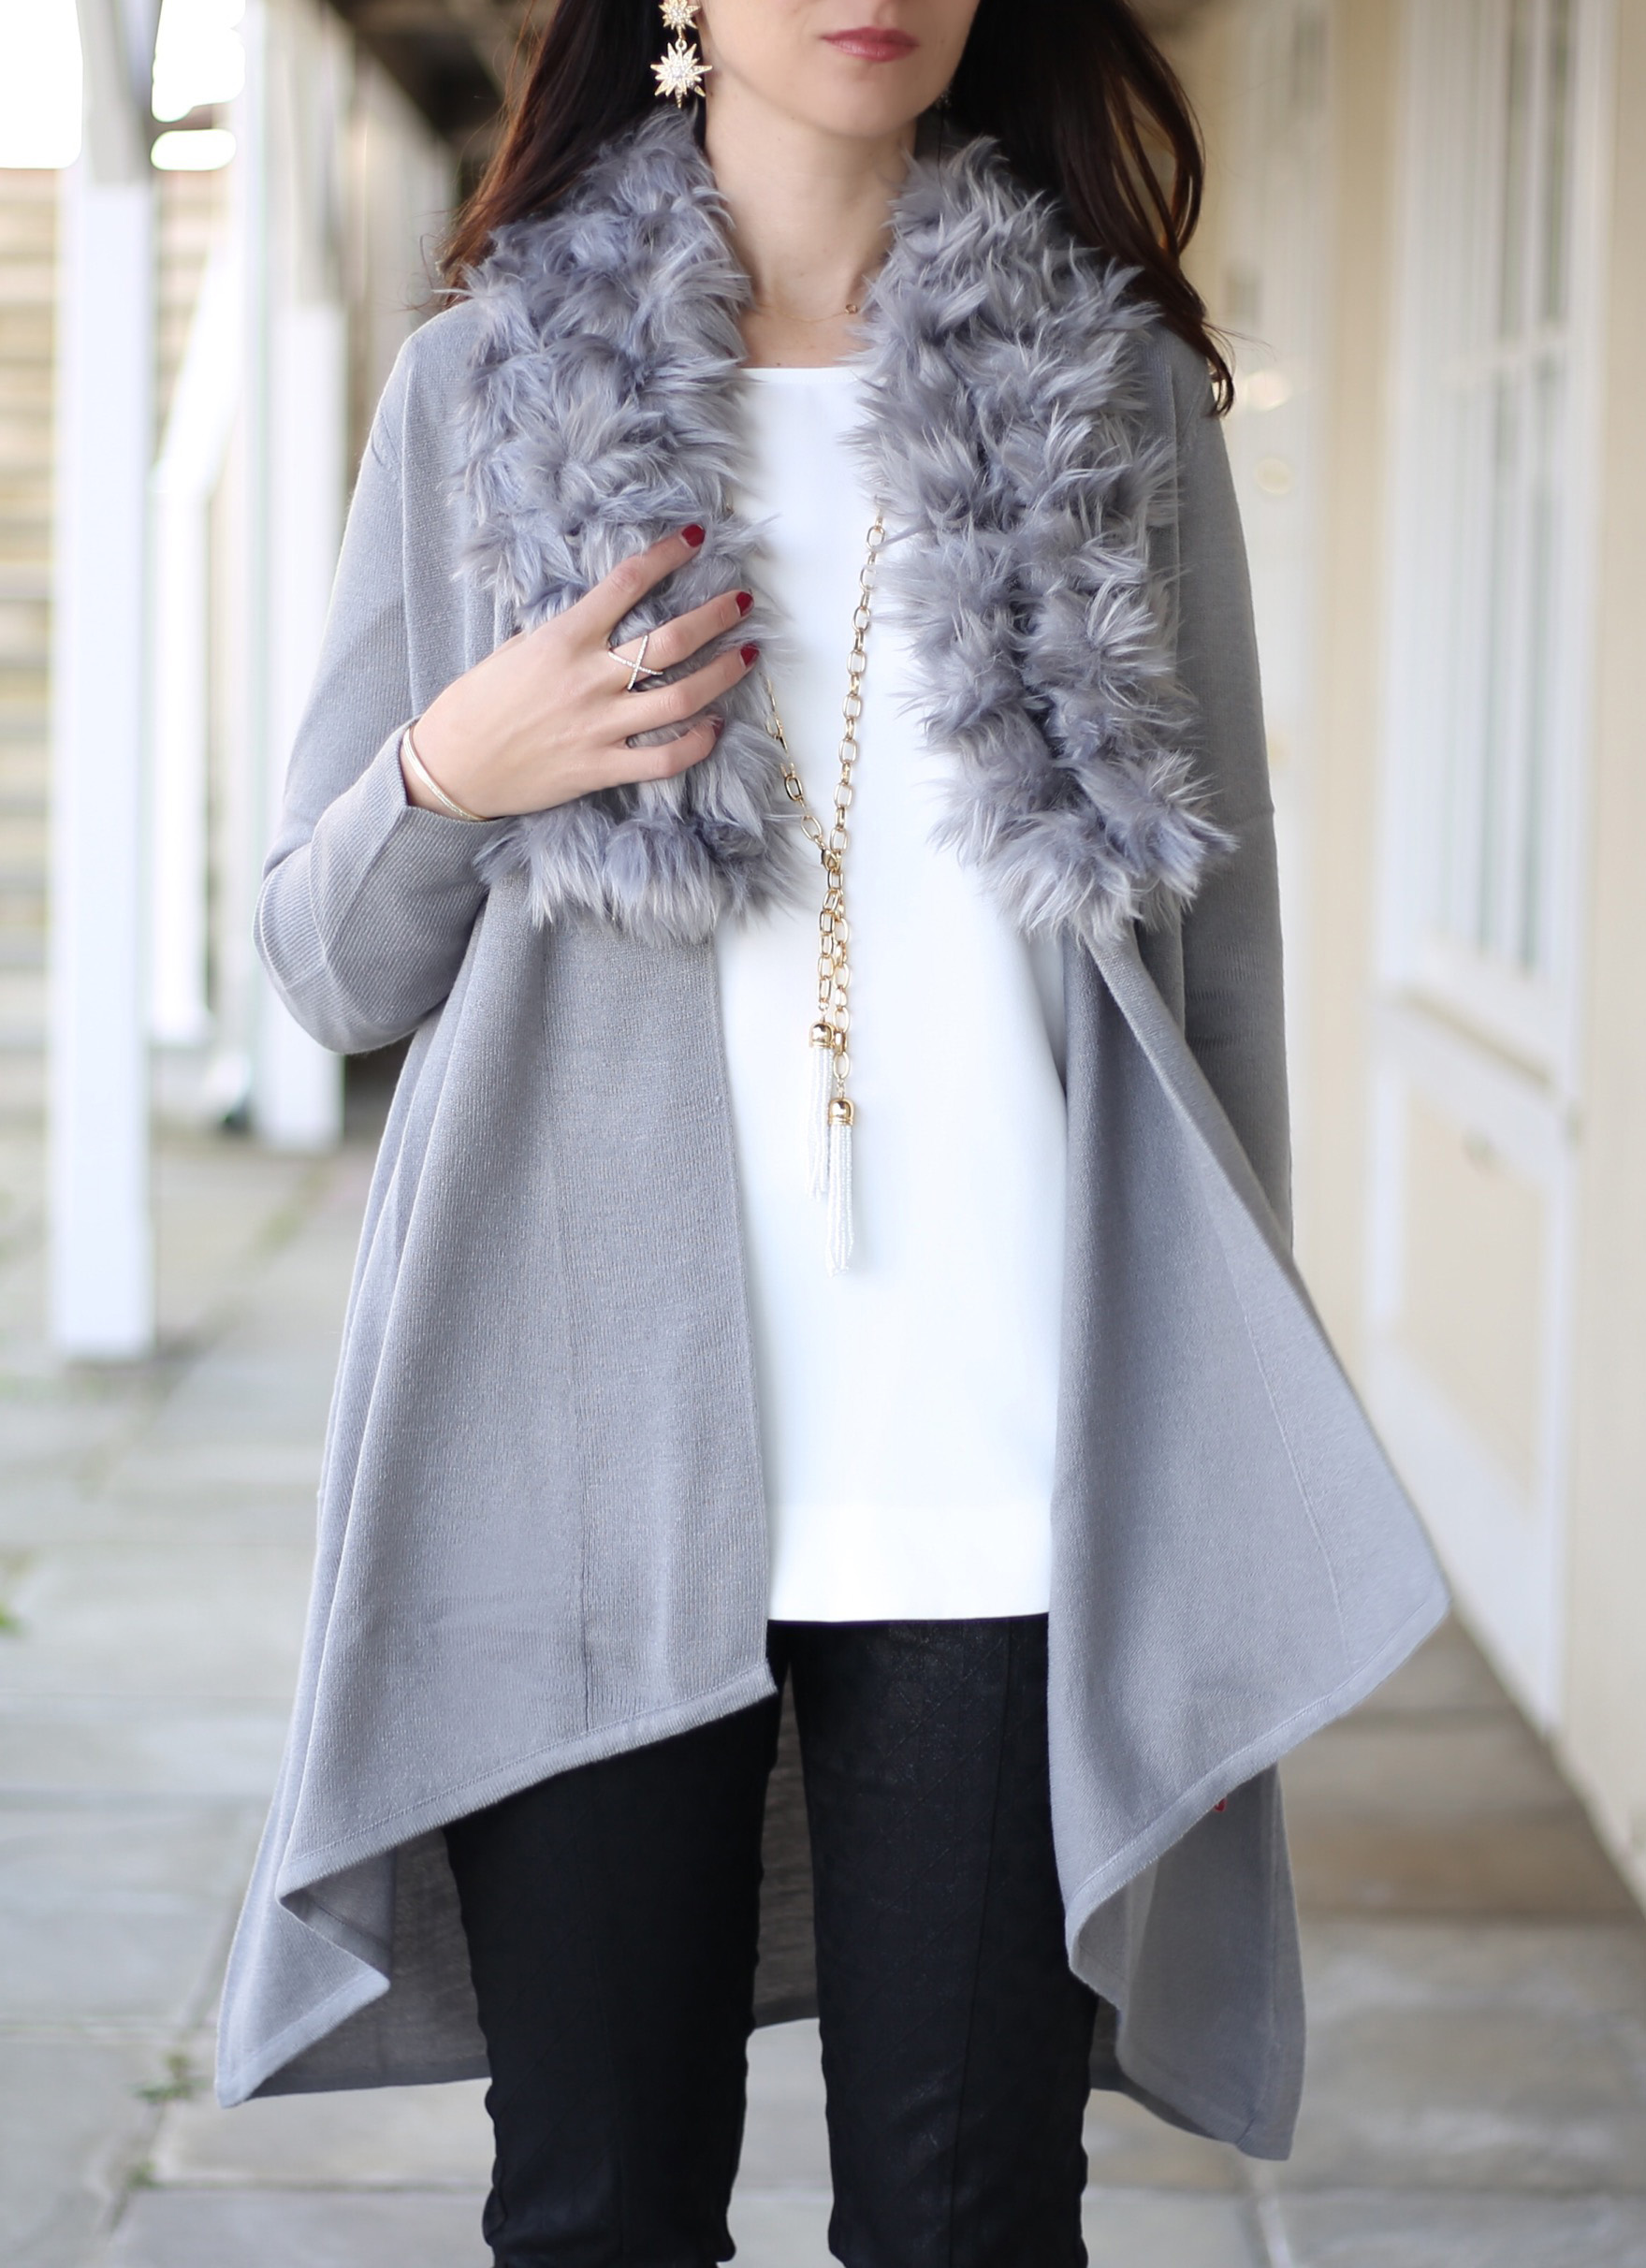 blogger Anna Monteiro of Blushing Rose Style wearing outfit for the office holiday party: Alfani faux fur trimmed cardigan in grey, Alfani white structured blouse from Macys, and Olive and Piper jewelry